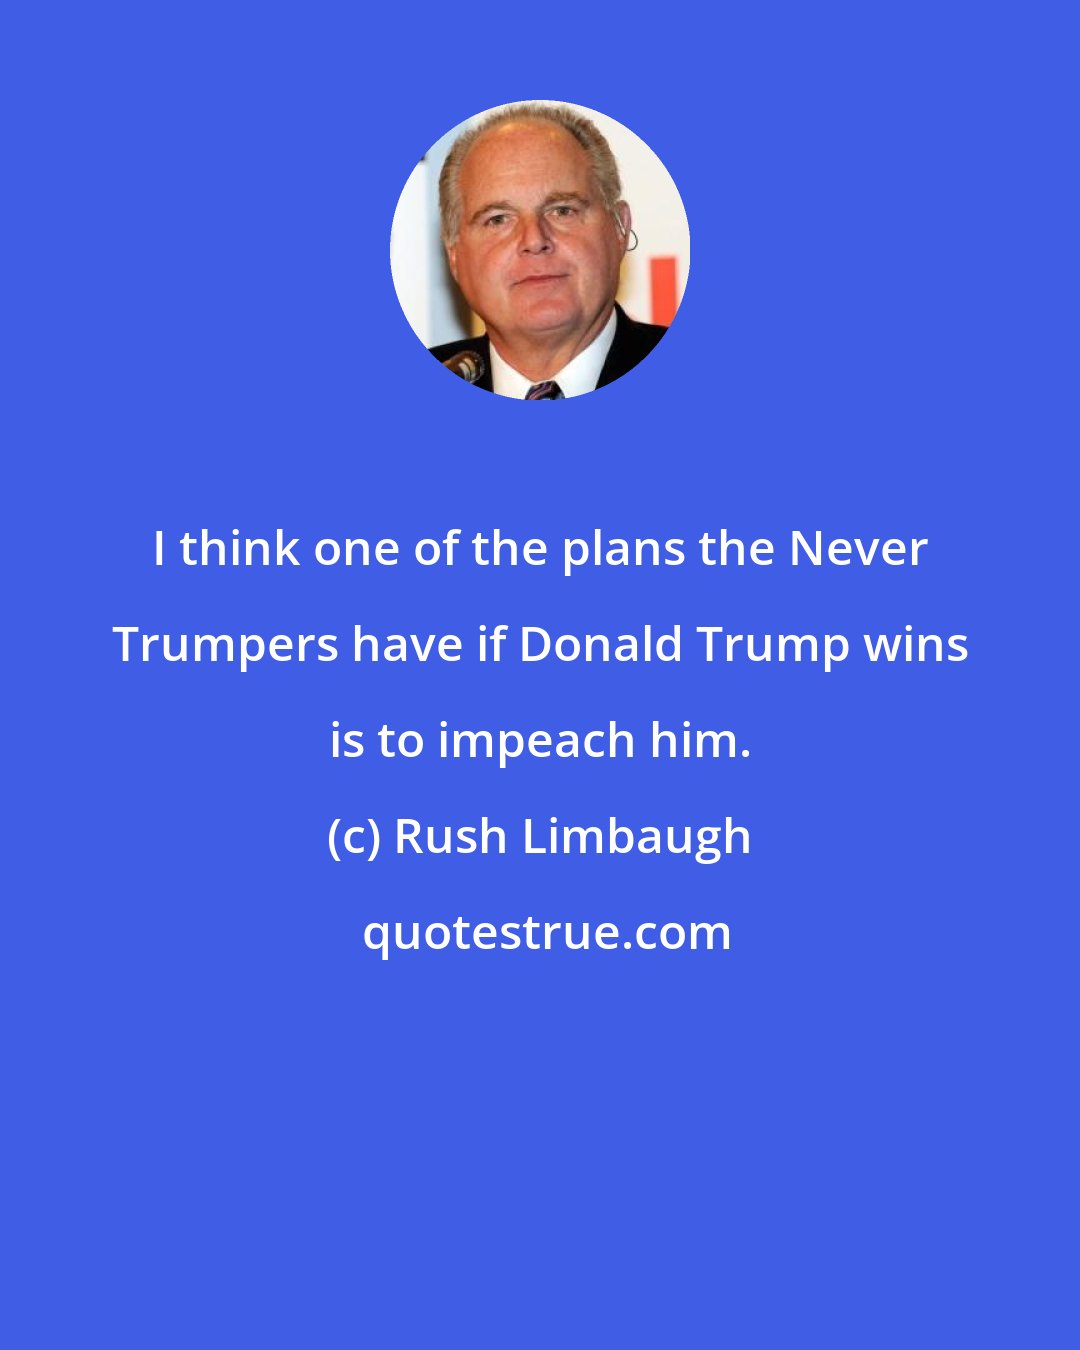 Rush Limbaugh: I think one of the plans the Never Trumpers have if Donald Trump wins is to impeach him.